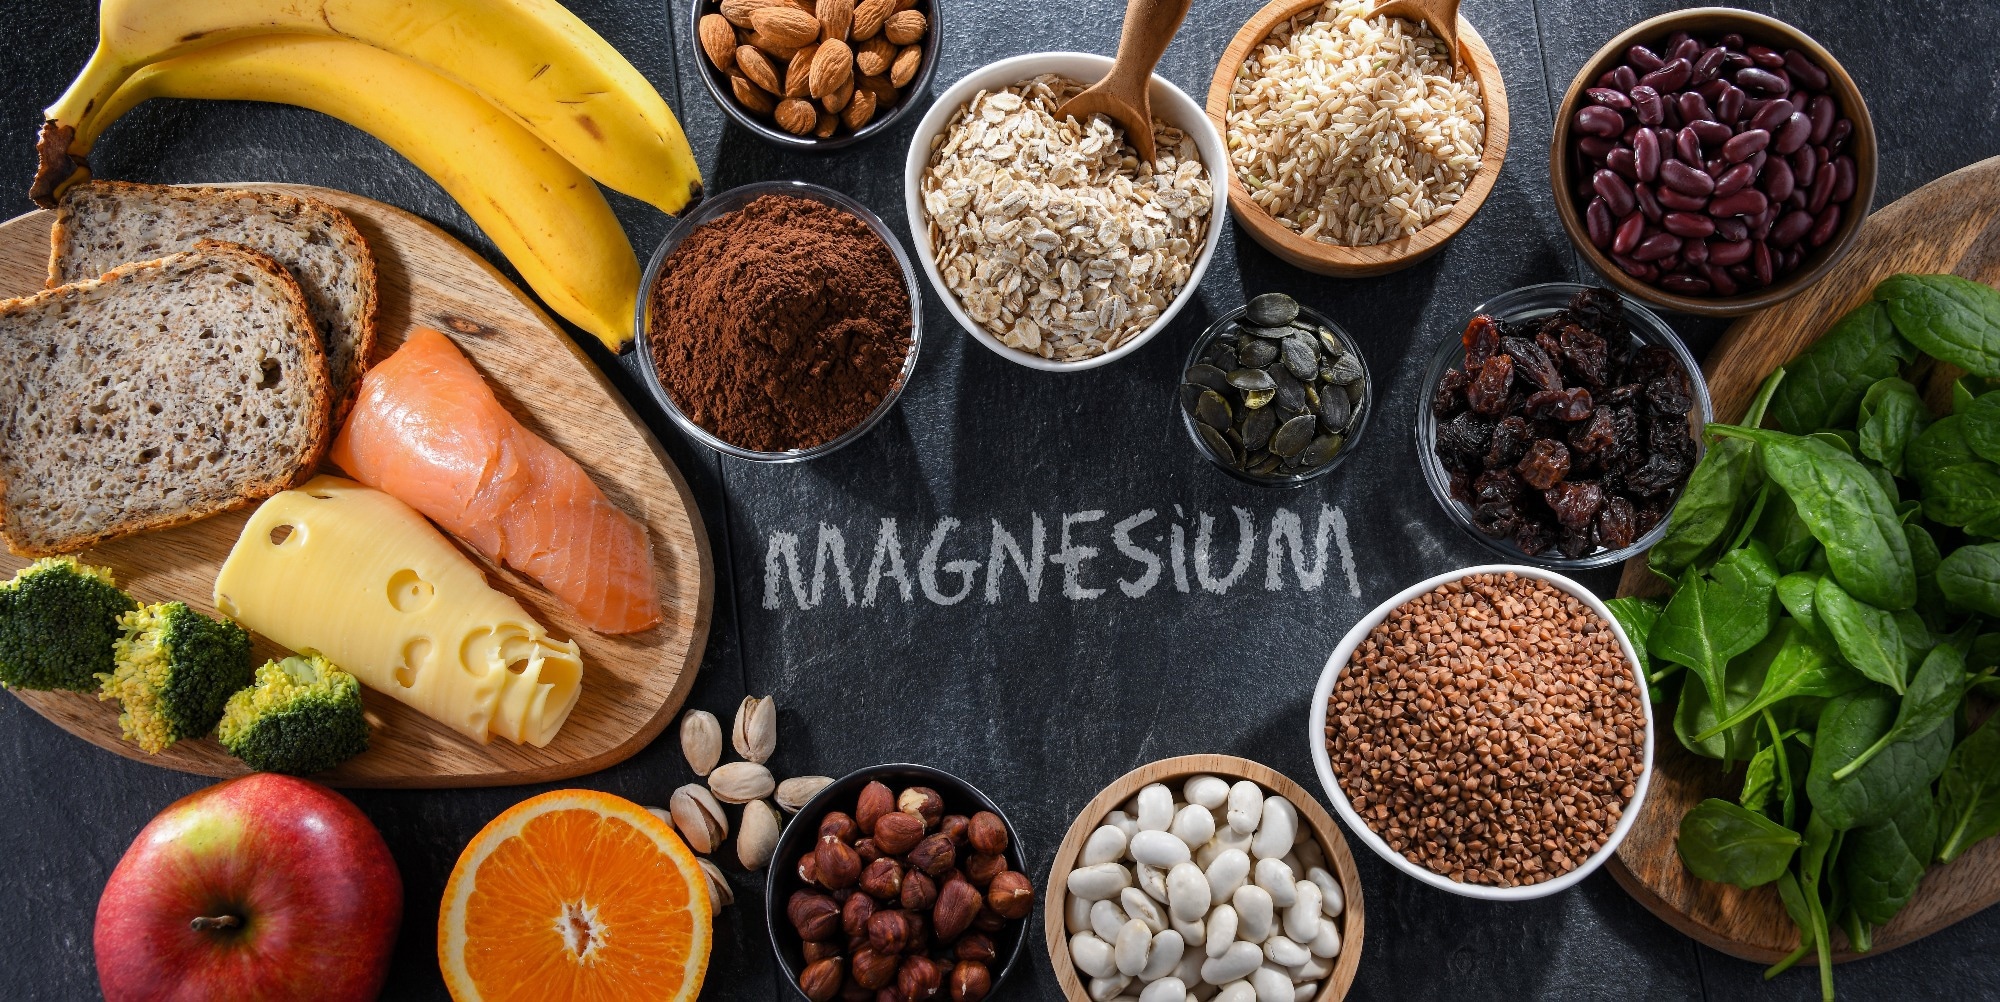 Study: Magnesium and the Hallmarks of Aging. Image Credit: monticello / Shutterstock.com